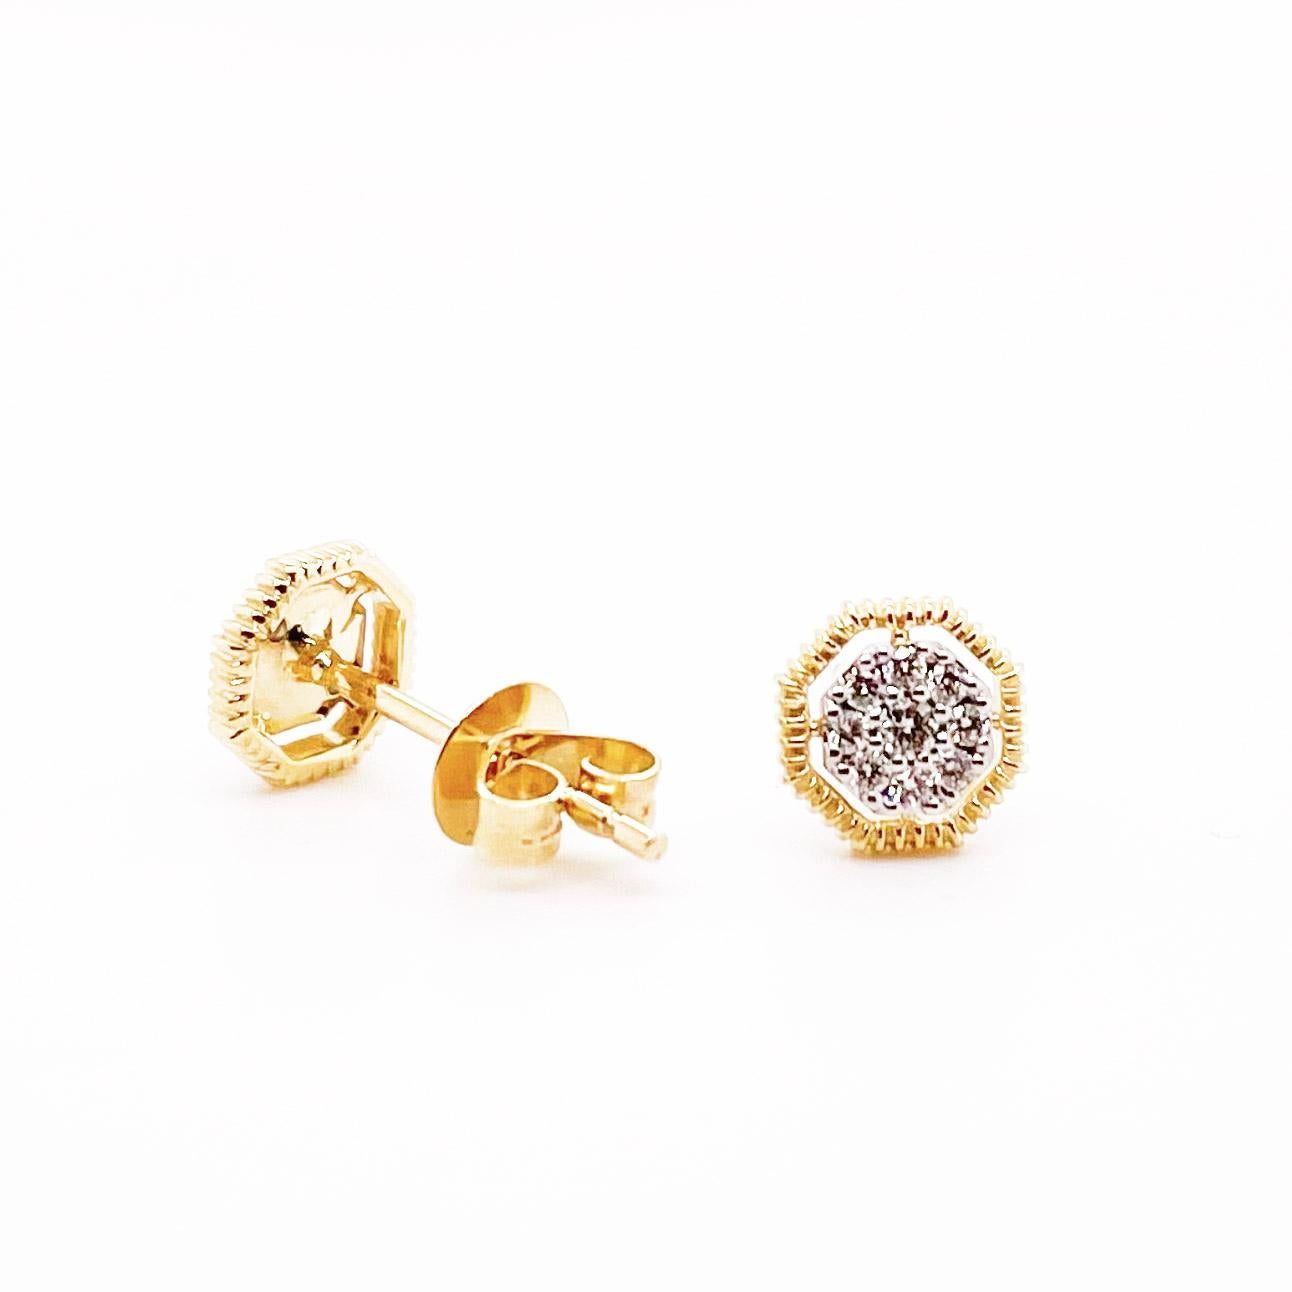 The eight diamond cluster earrings have a total of sixteen diamonds all set in 14 karat solid gold. There is a 14 karat white gold center and a 14 karat yellow gold textured edge with 14 karat yellow gold posts. The details for these gorgeous